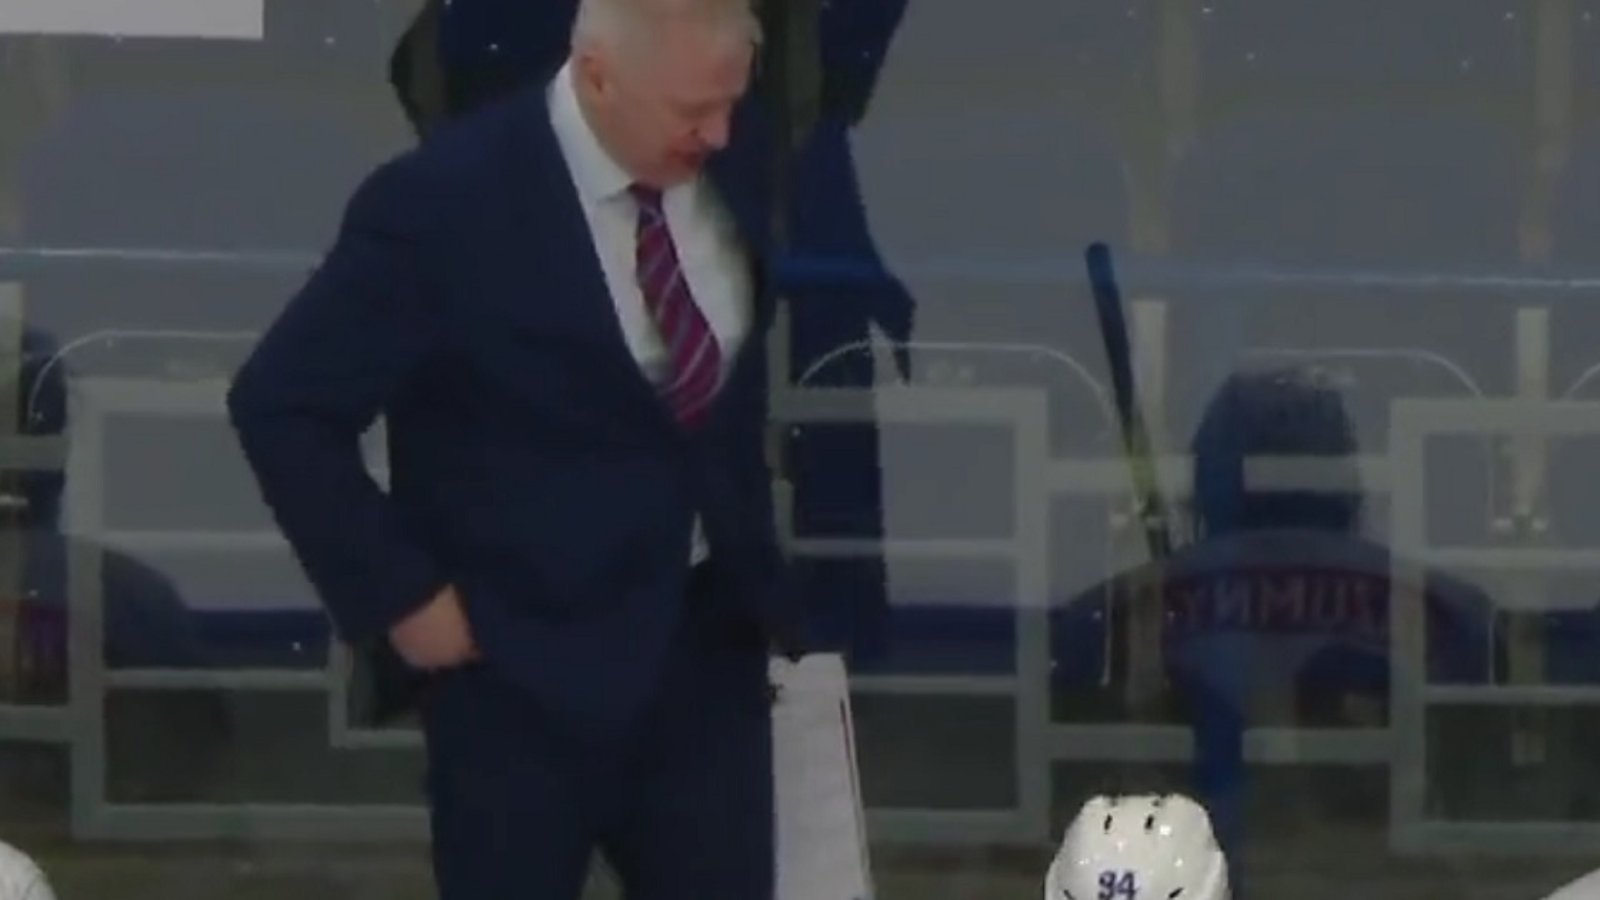 Russian coach fired after kicking a player on the bench.